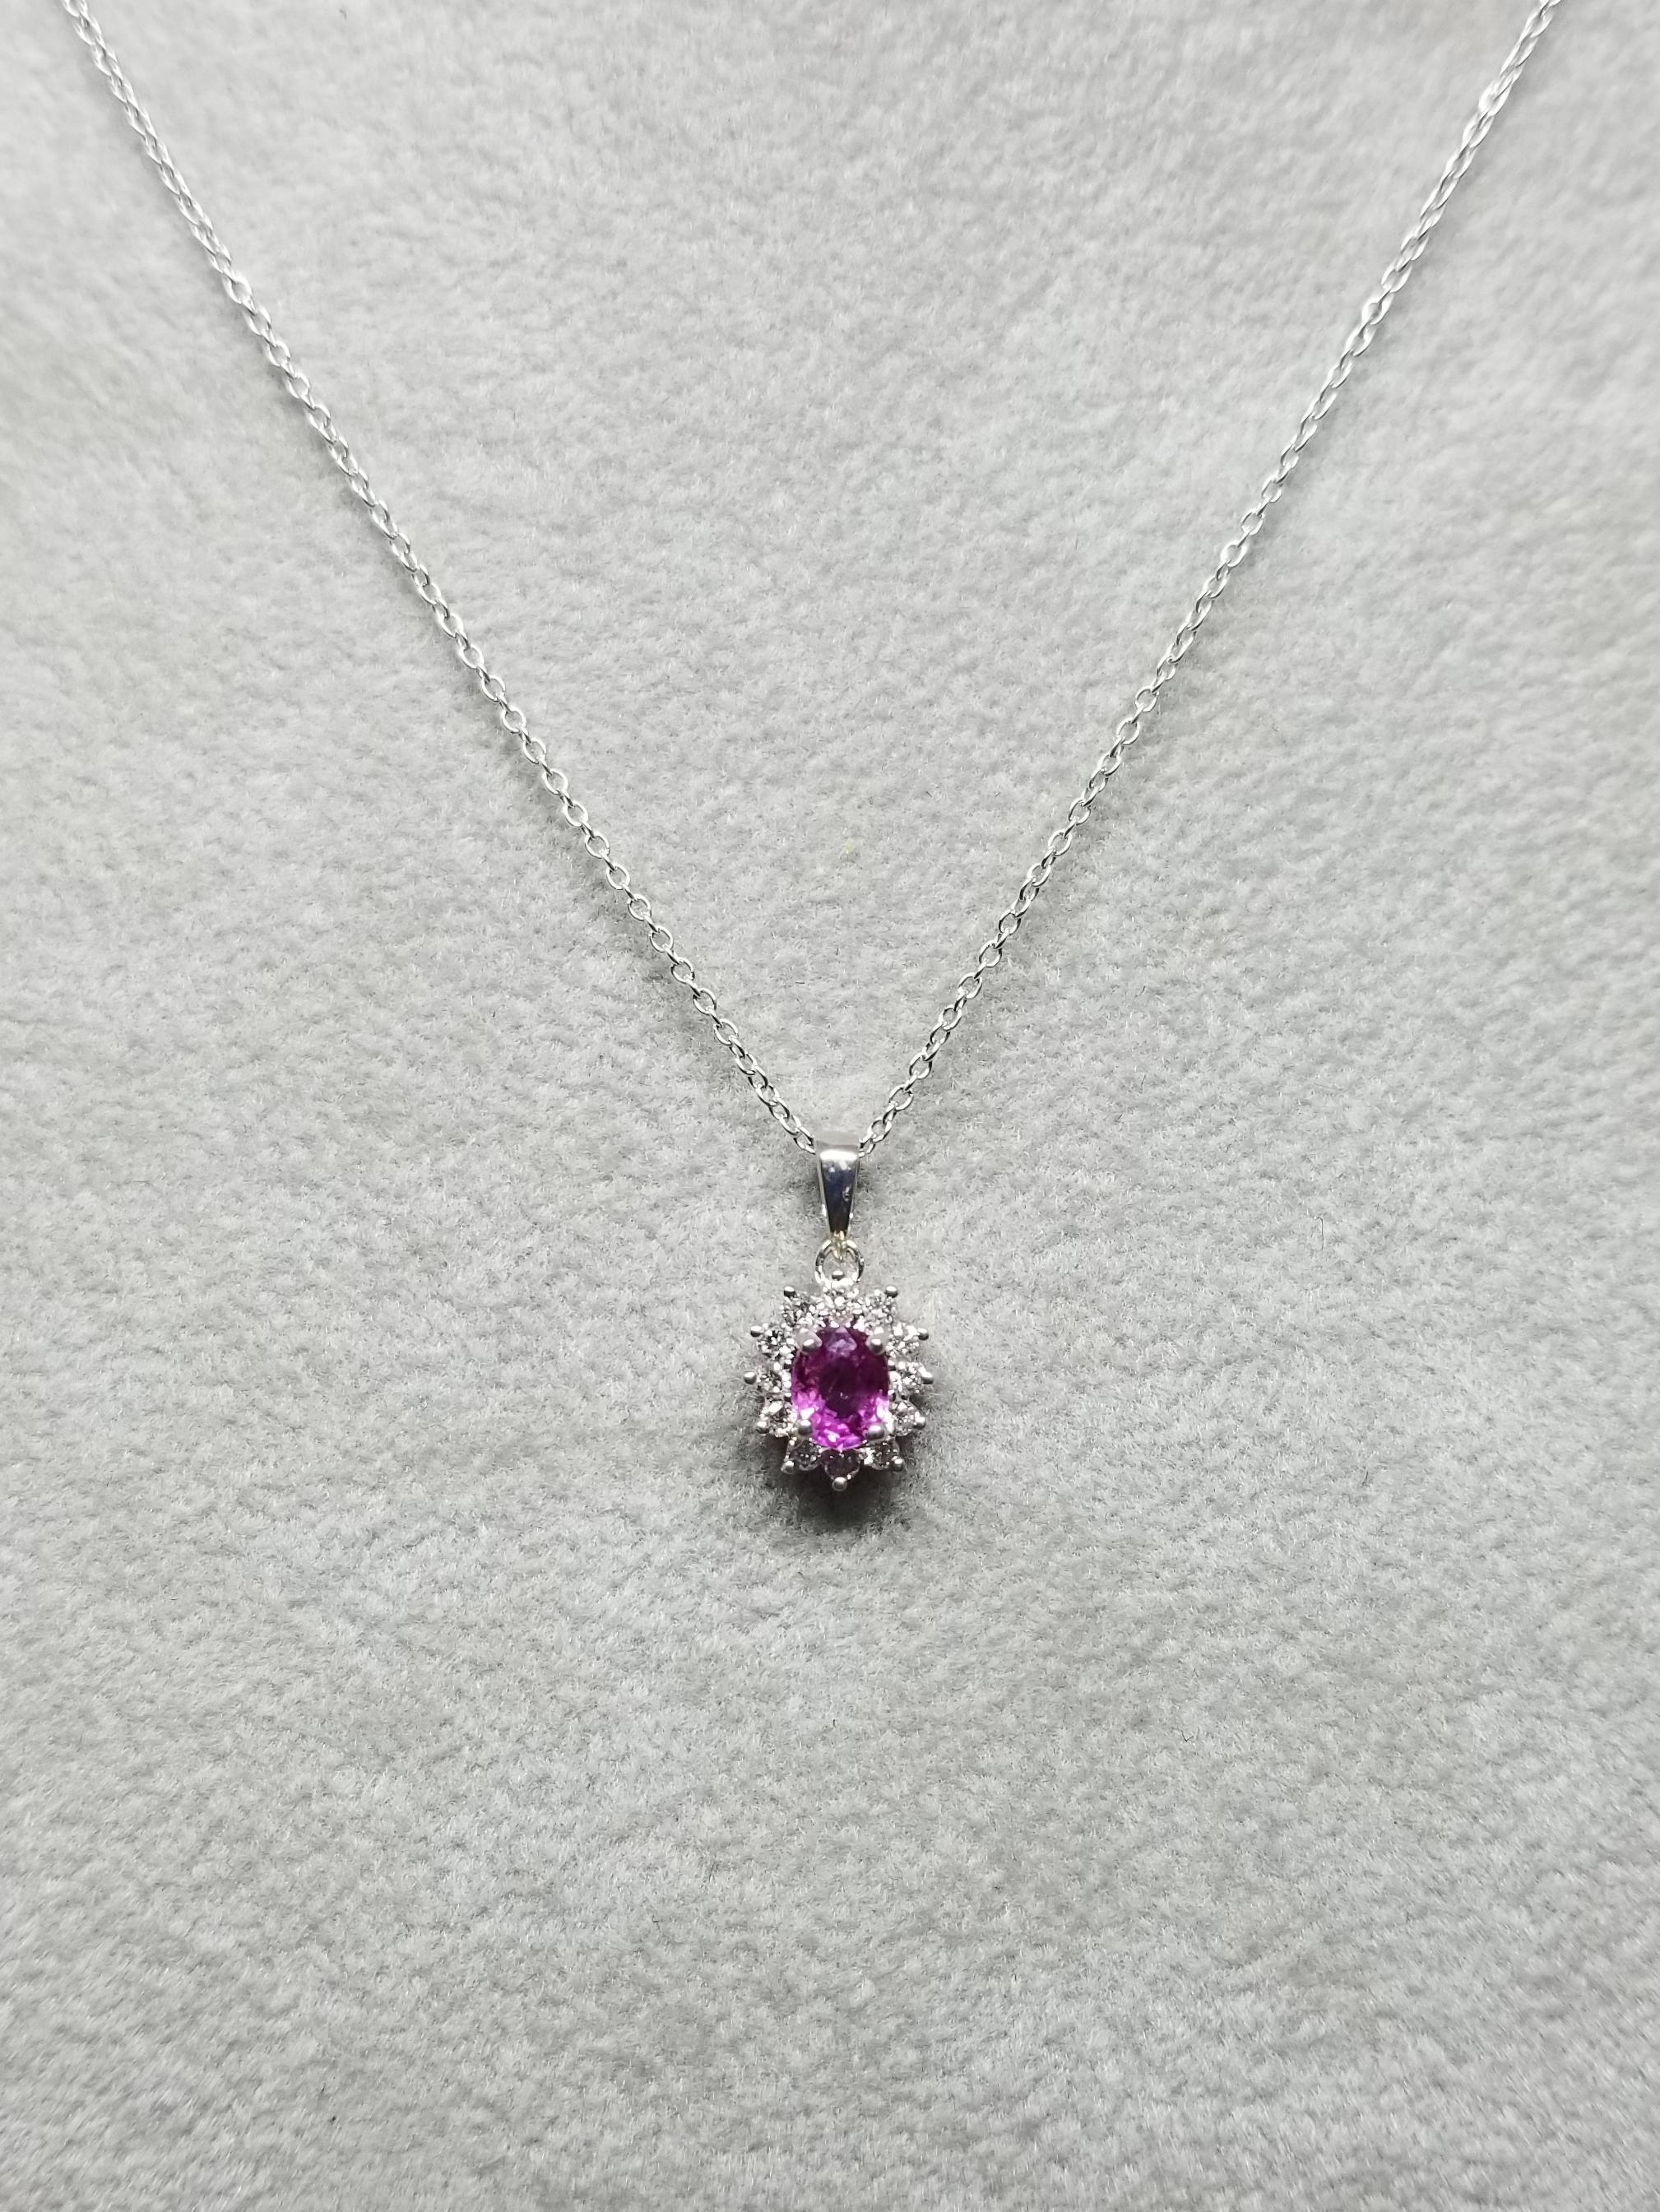 18k white gold oval pink sapphire weighing .47pts. and 12 round full cut diamonds of very fine quality weighing .15pts. on a 14k white gold 16 inch chain.
*pick a gemstone for the center*